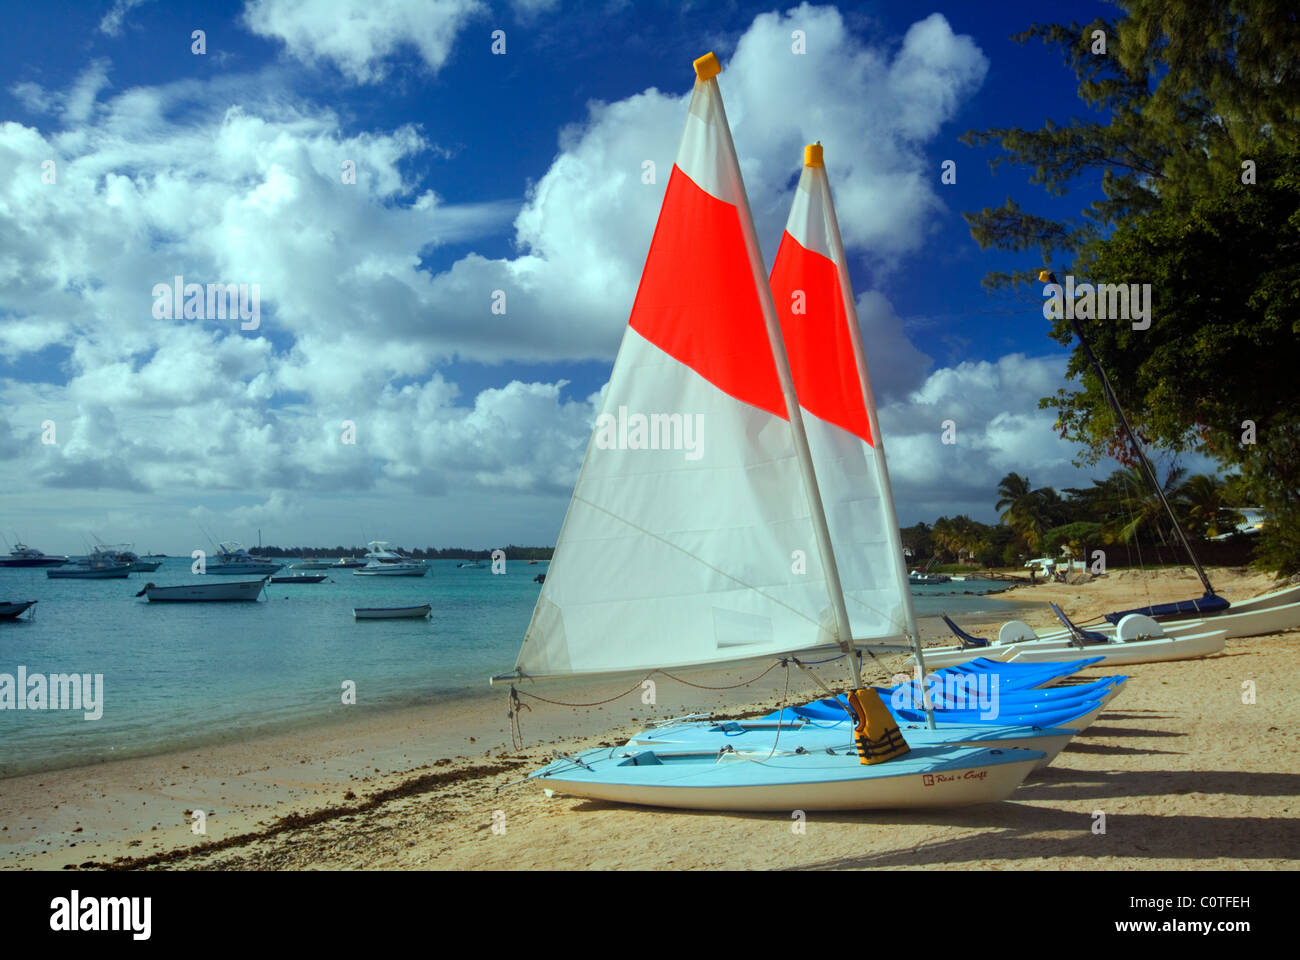 Sailing yachts for hire on beach, Mauritius Stock Photo